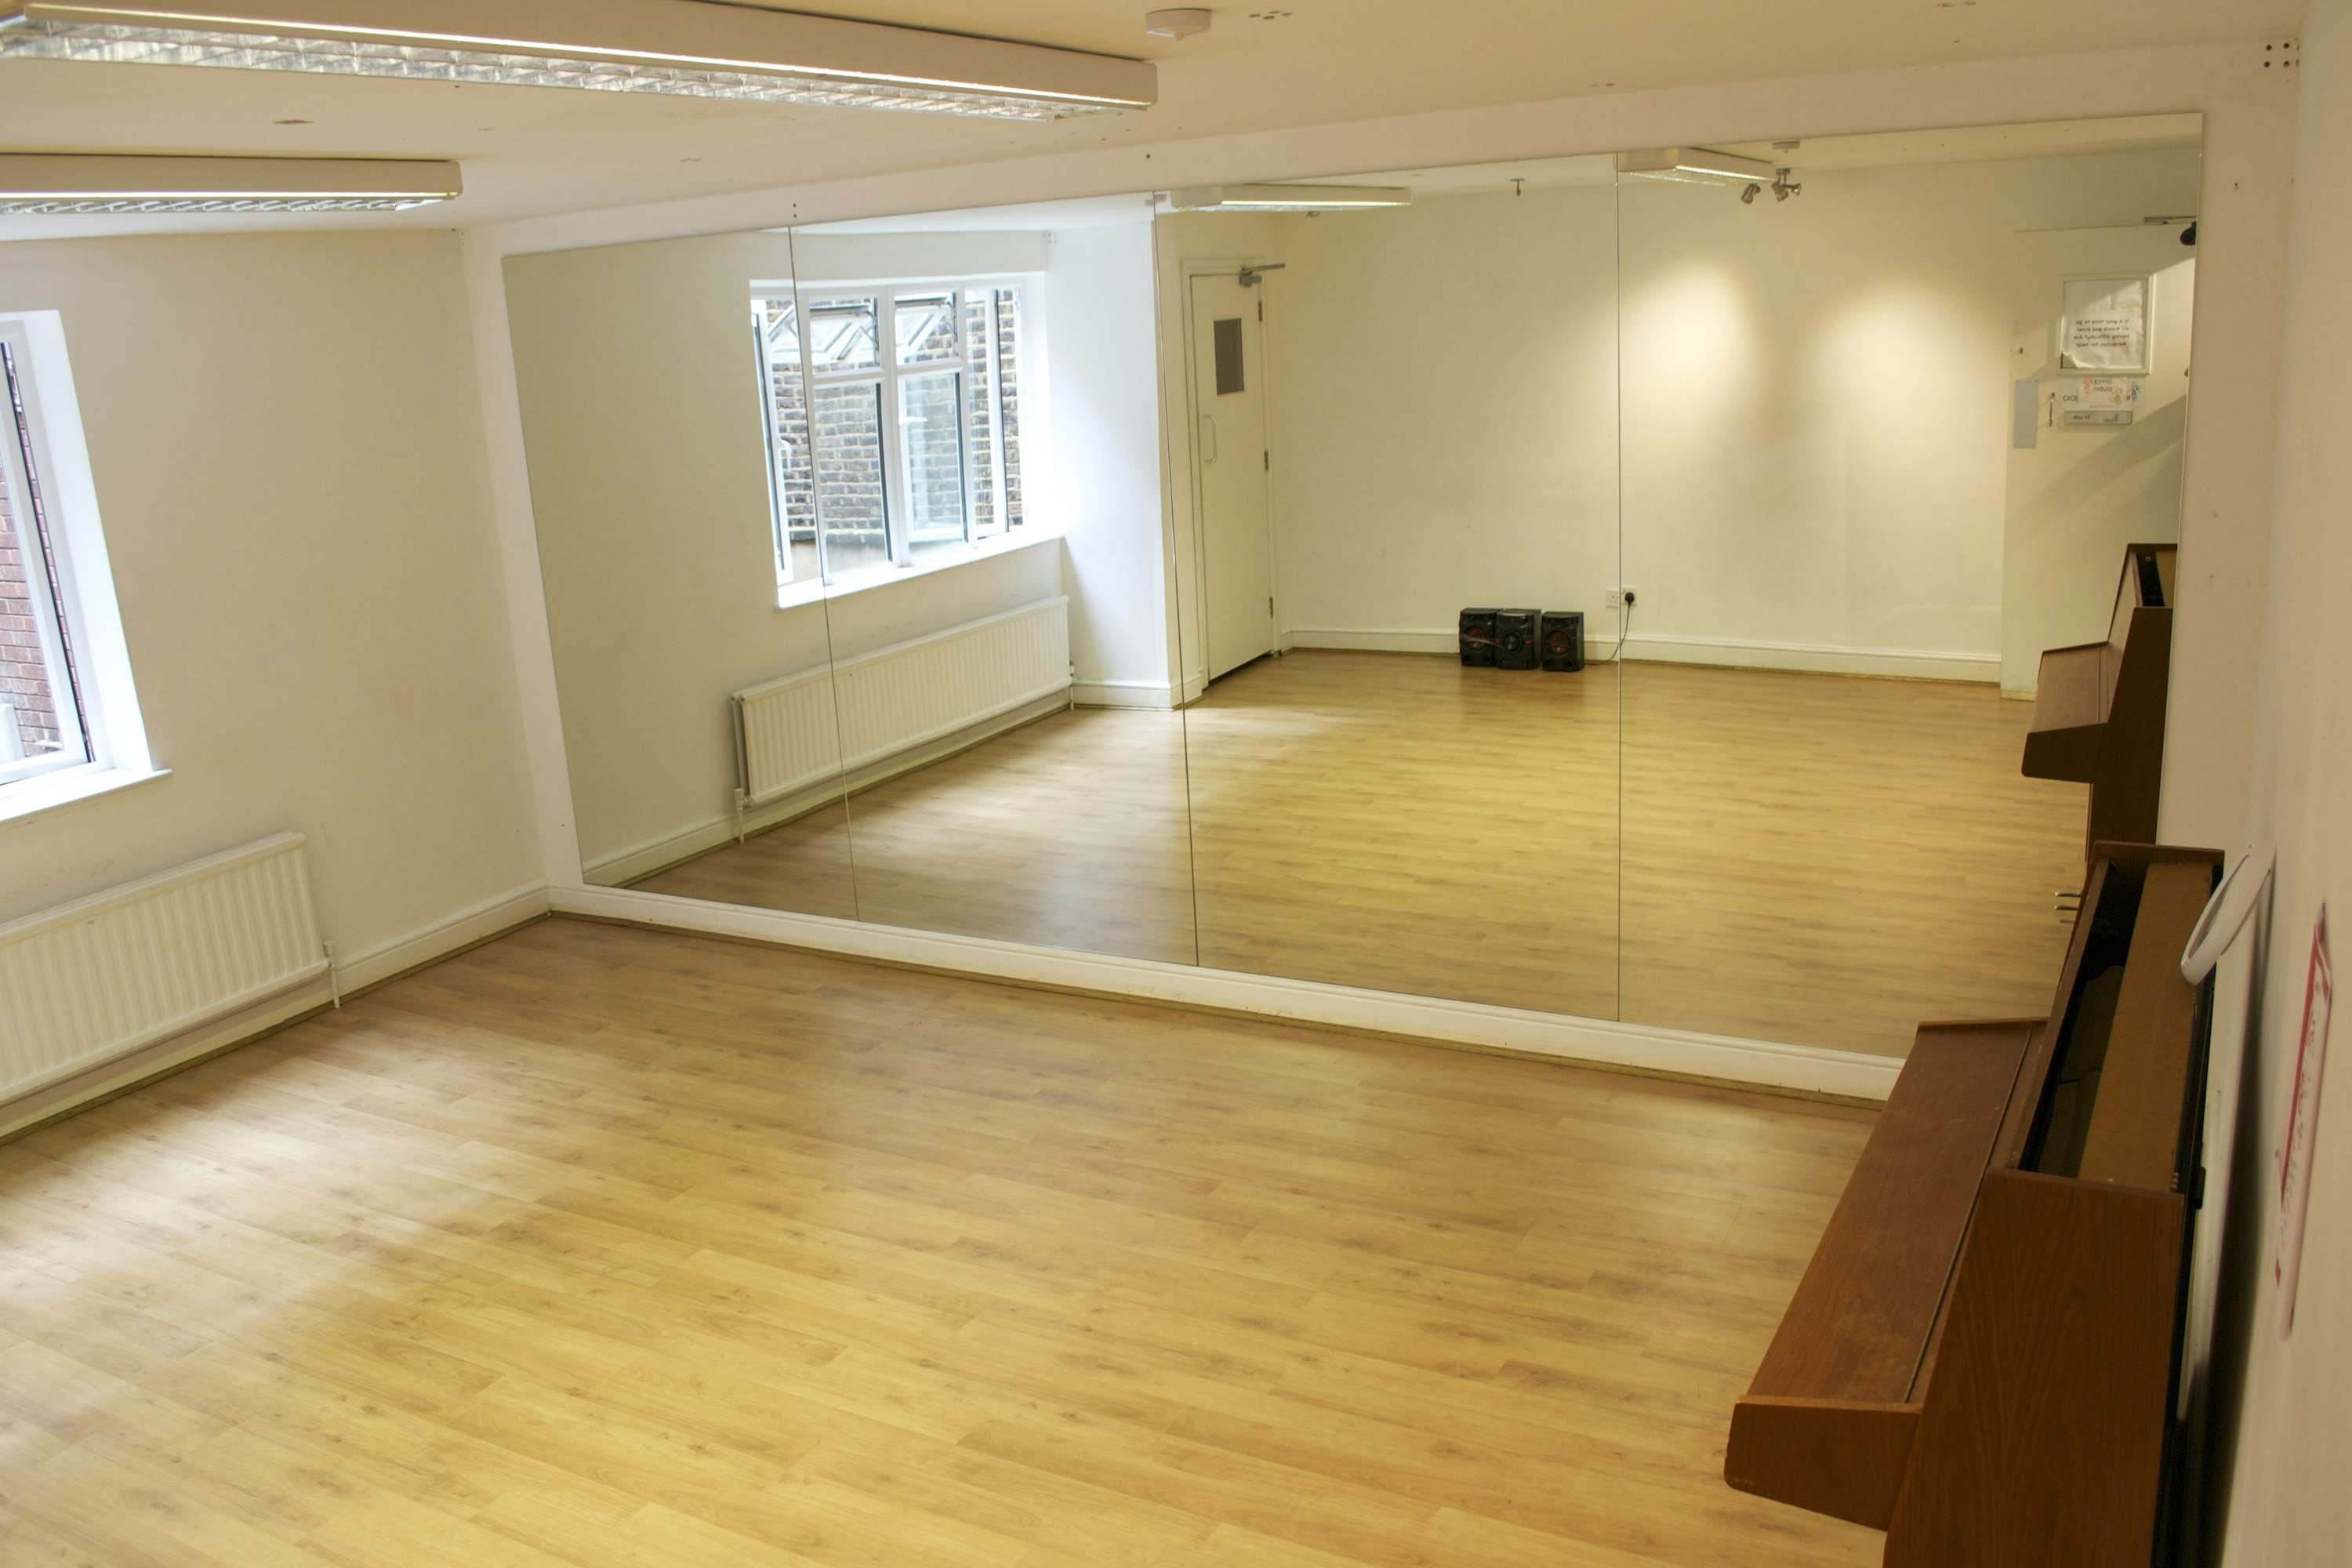 The Academy - The Office Studio image 3